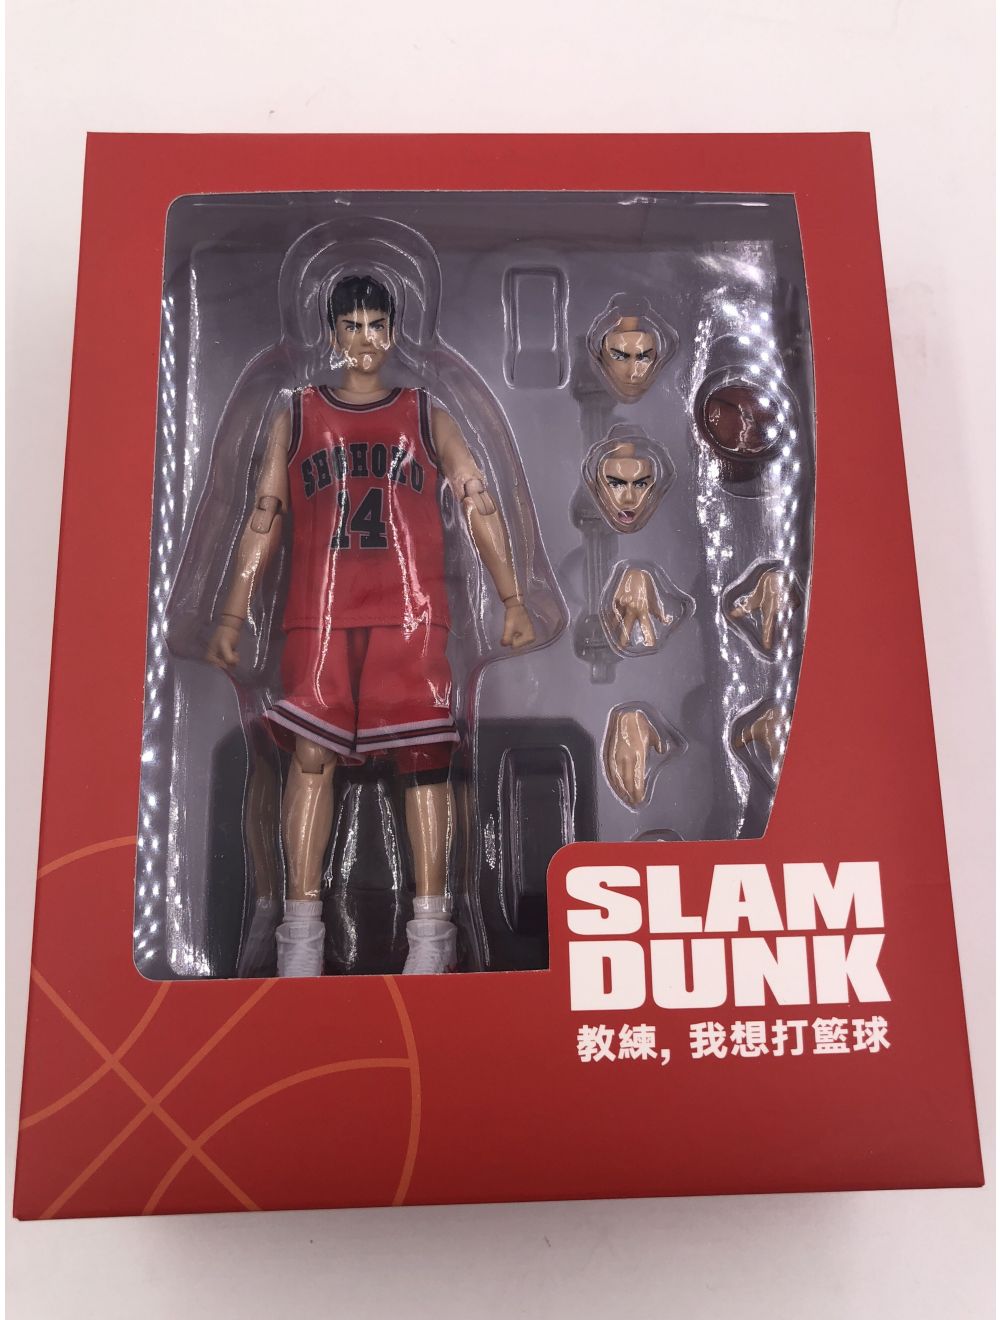 Dasheng Slam Dunk 1/10 Model Basketball stand collection toy 